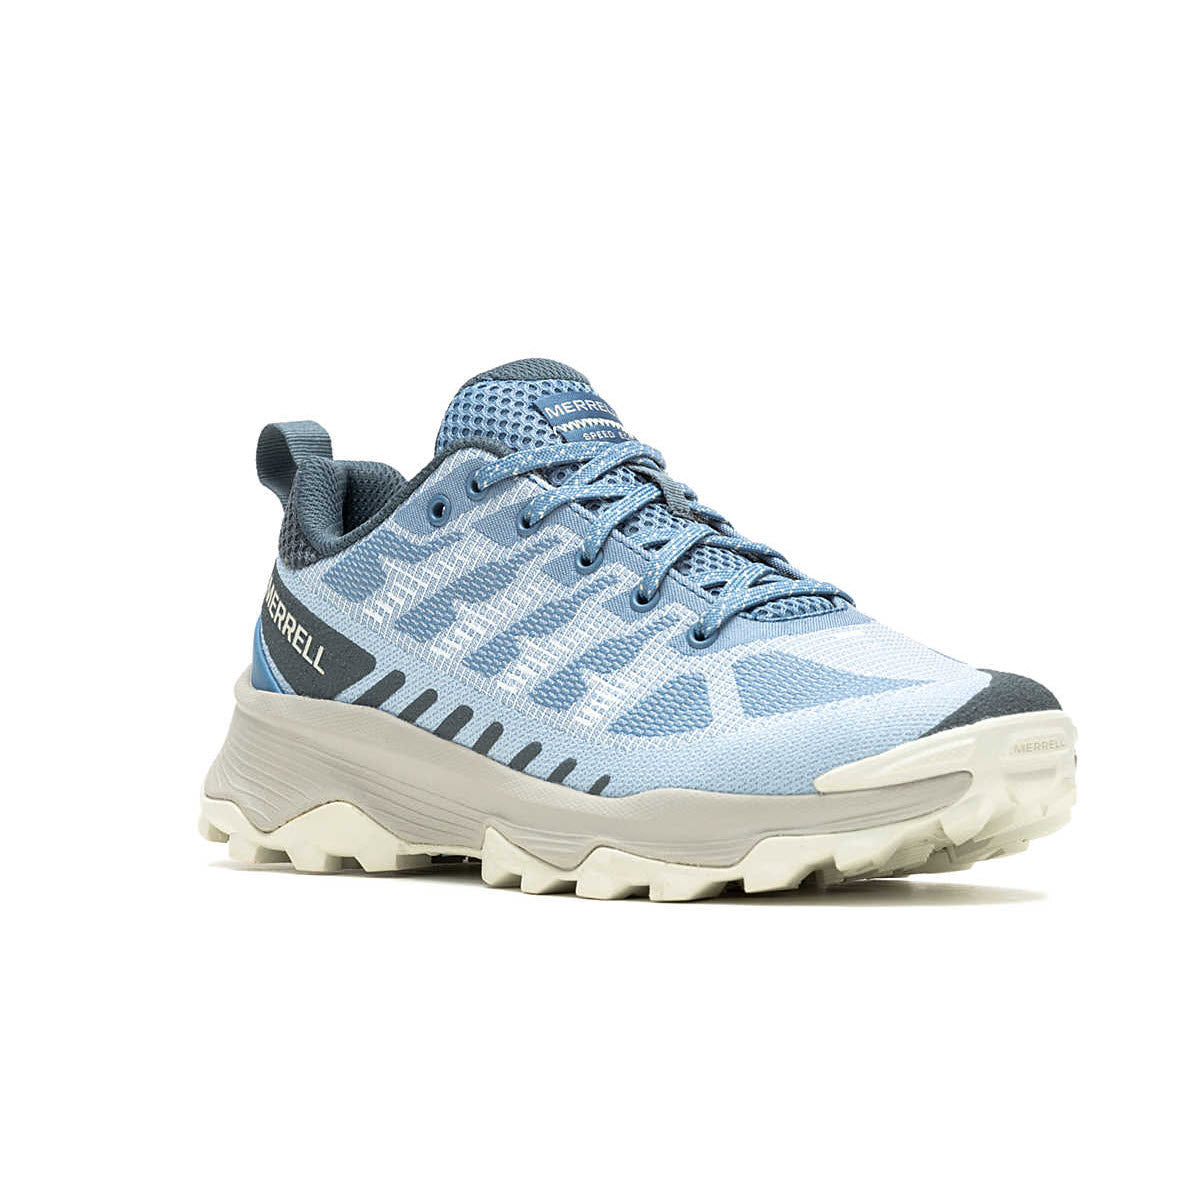 A light blue Merrell Speed Eco Chambray hiking shoe with a white, recycled rubber outsole, featuring a patterned design and lace-up front, isolated on a white background.